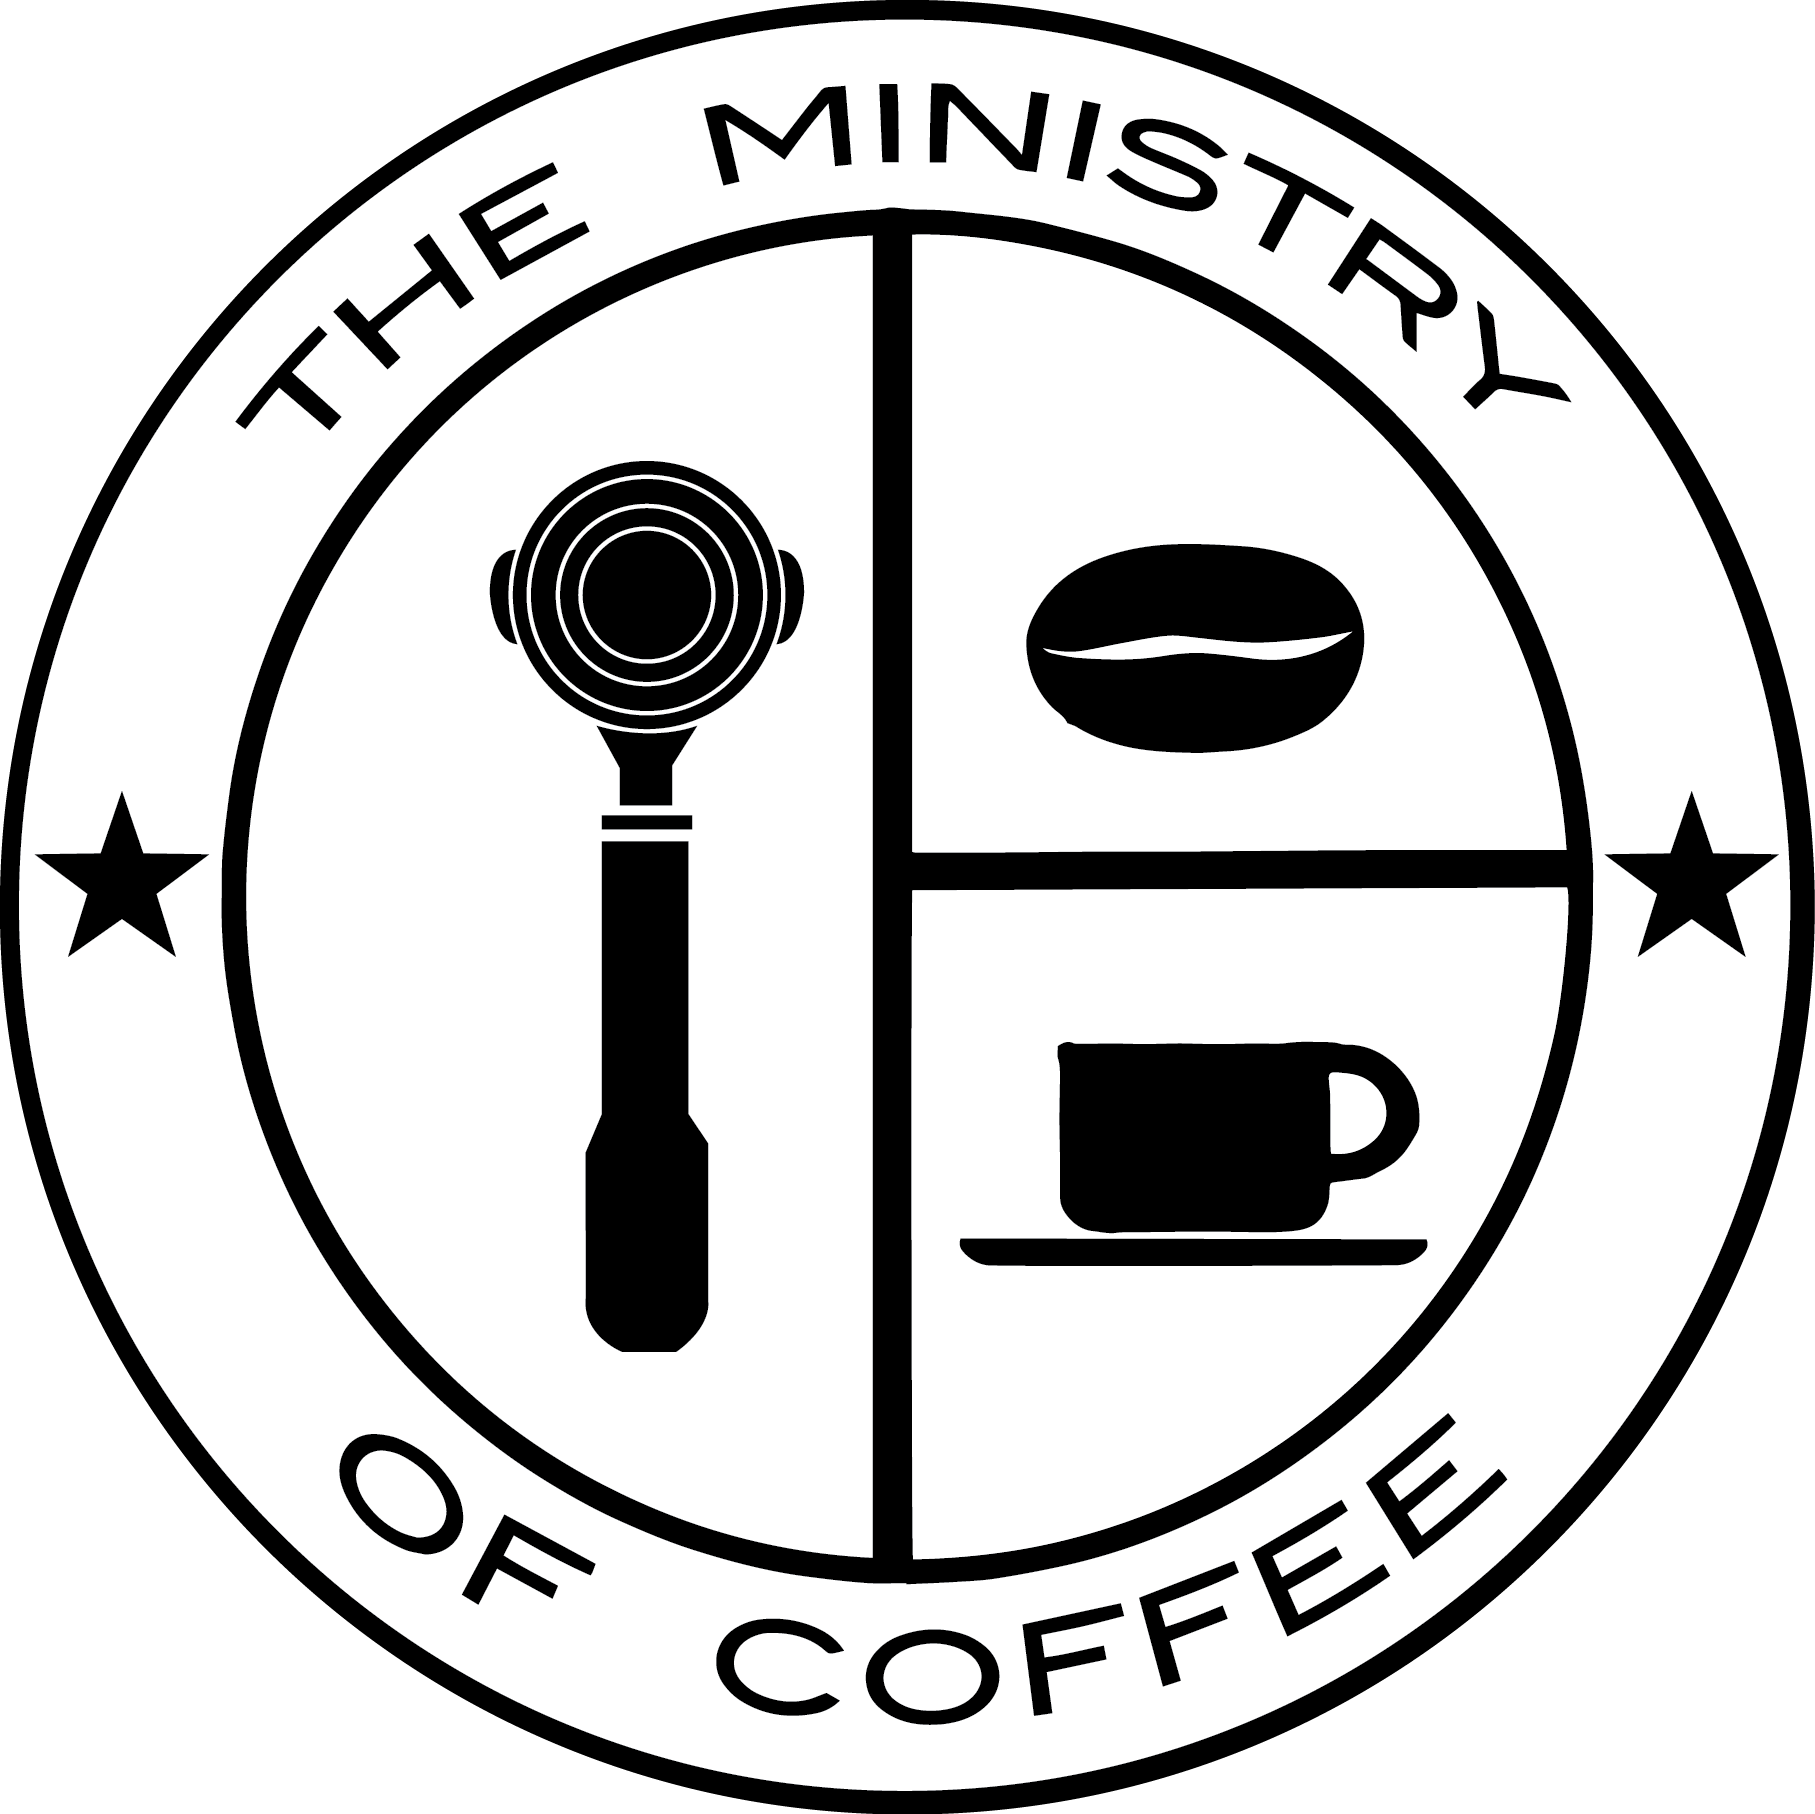 coffee beans – The ministry of coffee LLC